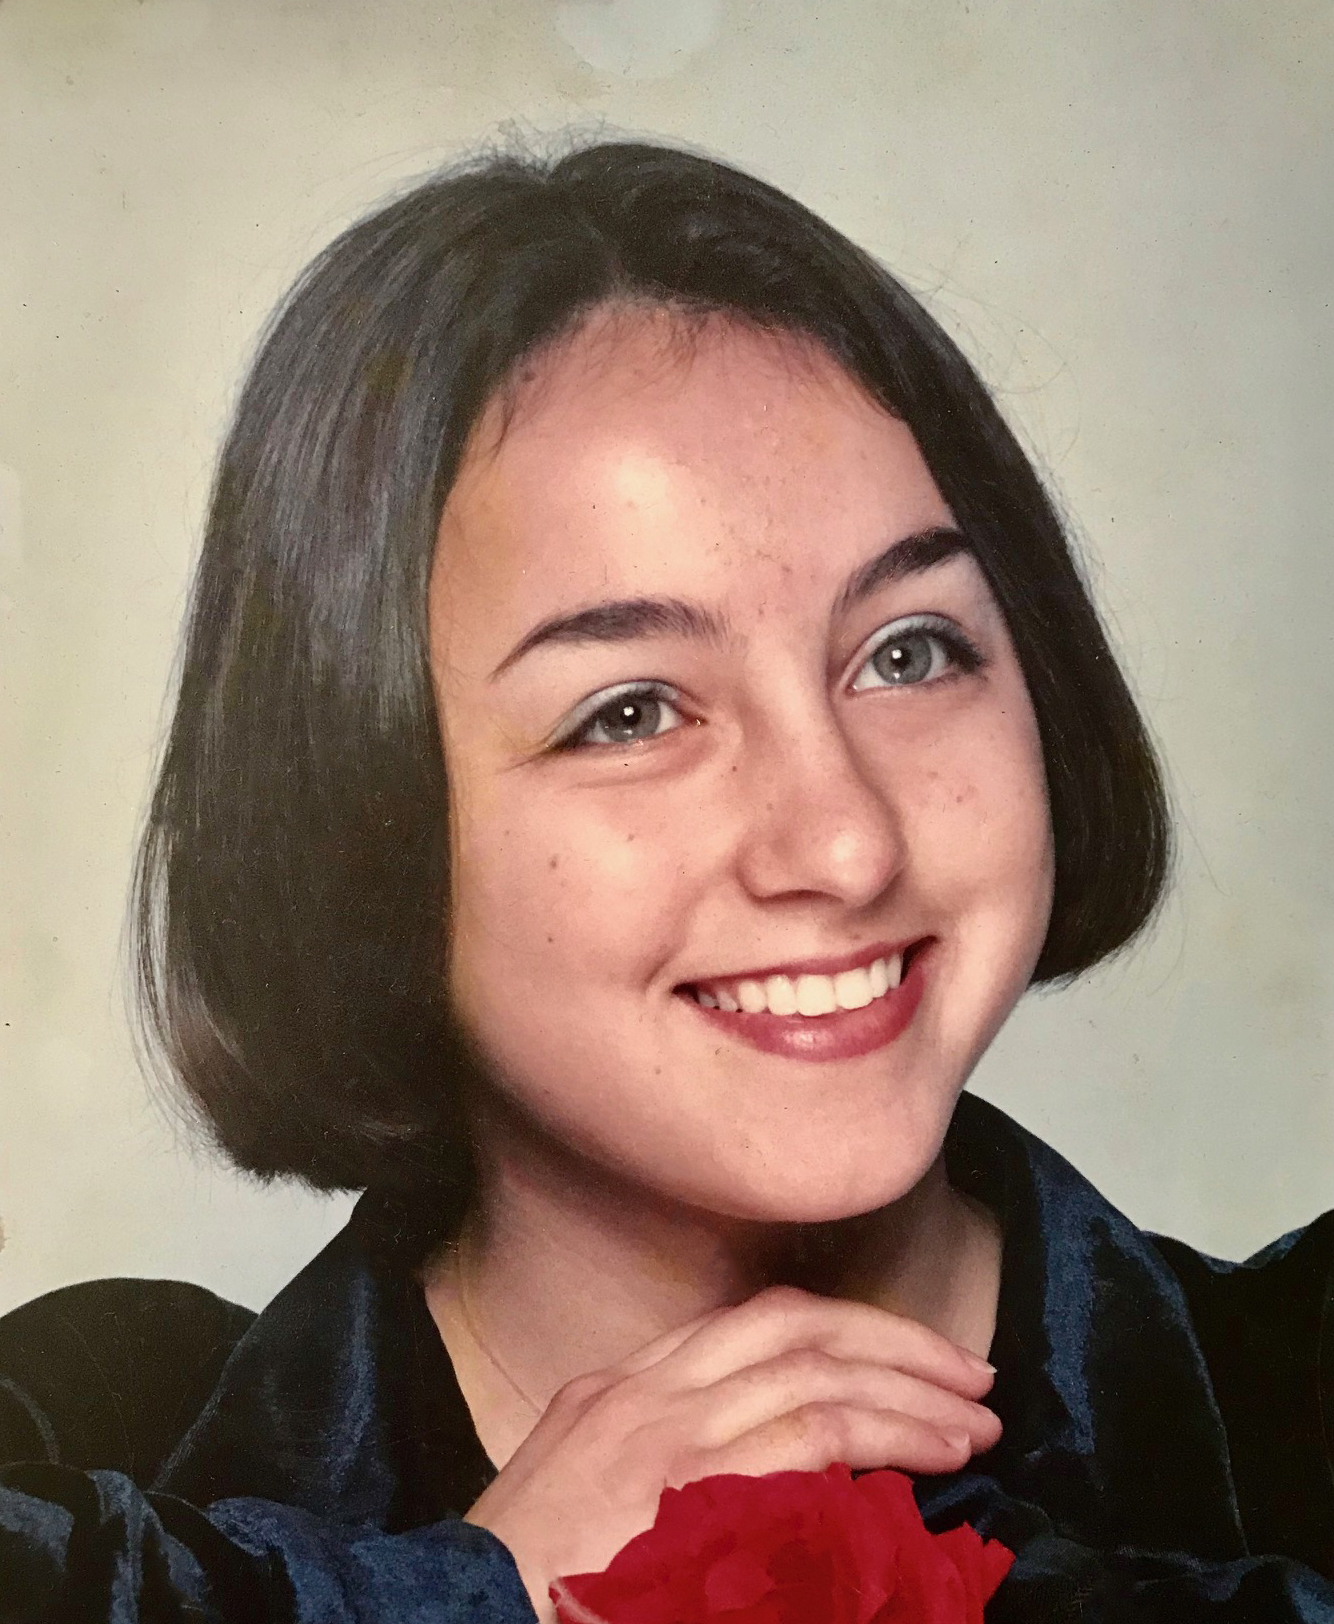 A school portrait of Anush when she was on the FLEX program, with a short hair cut, holding a flower in front of her.